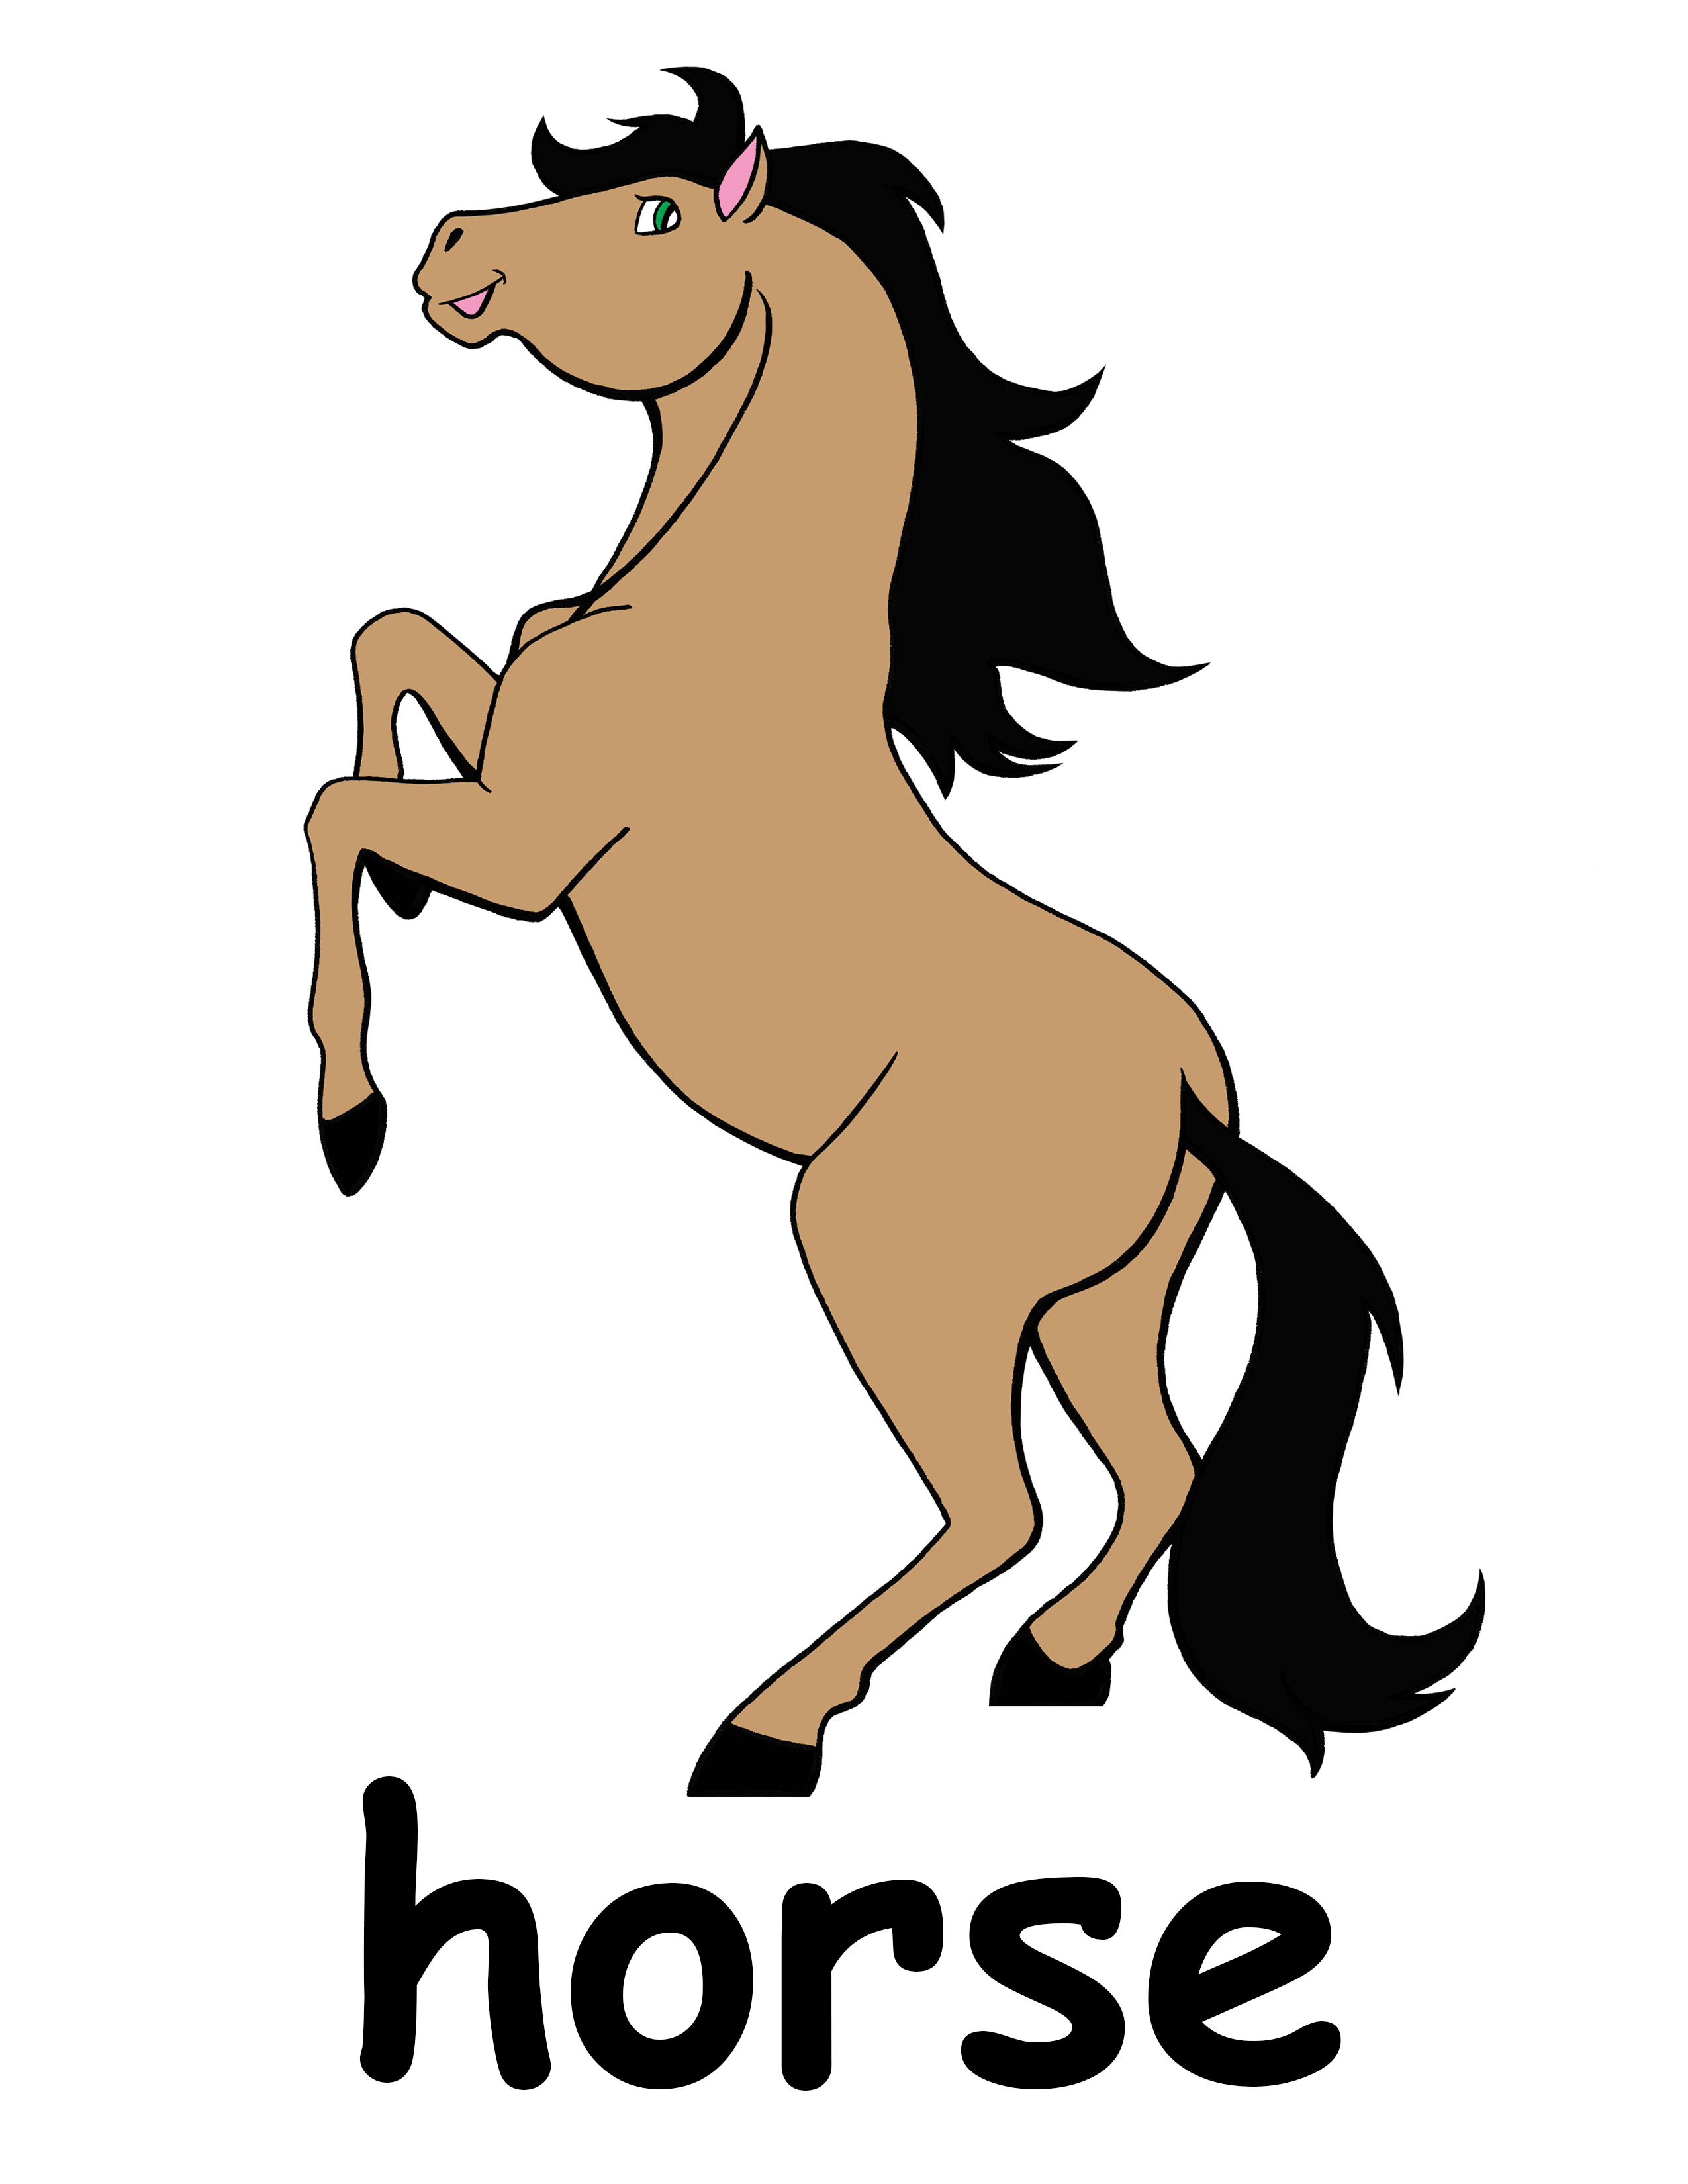 Horse Hd Image Clipart